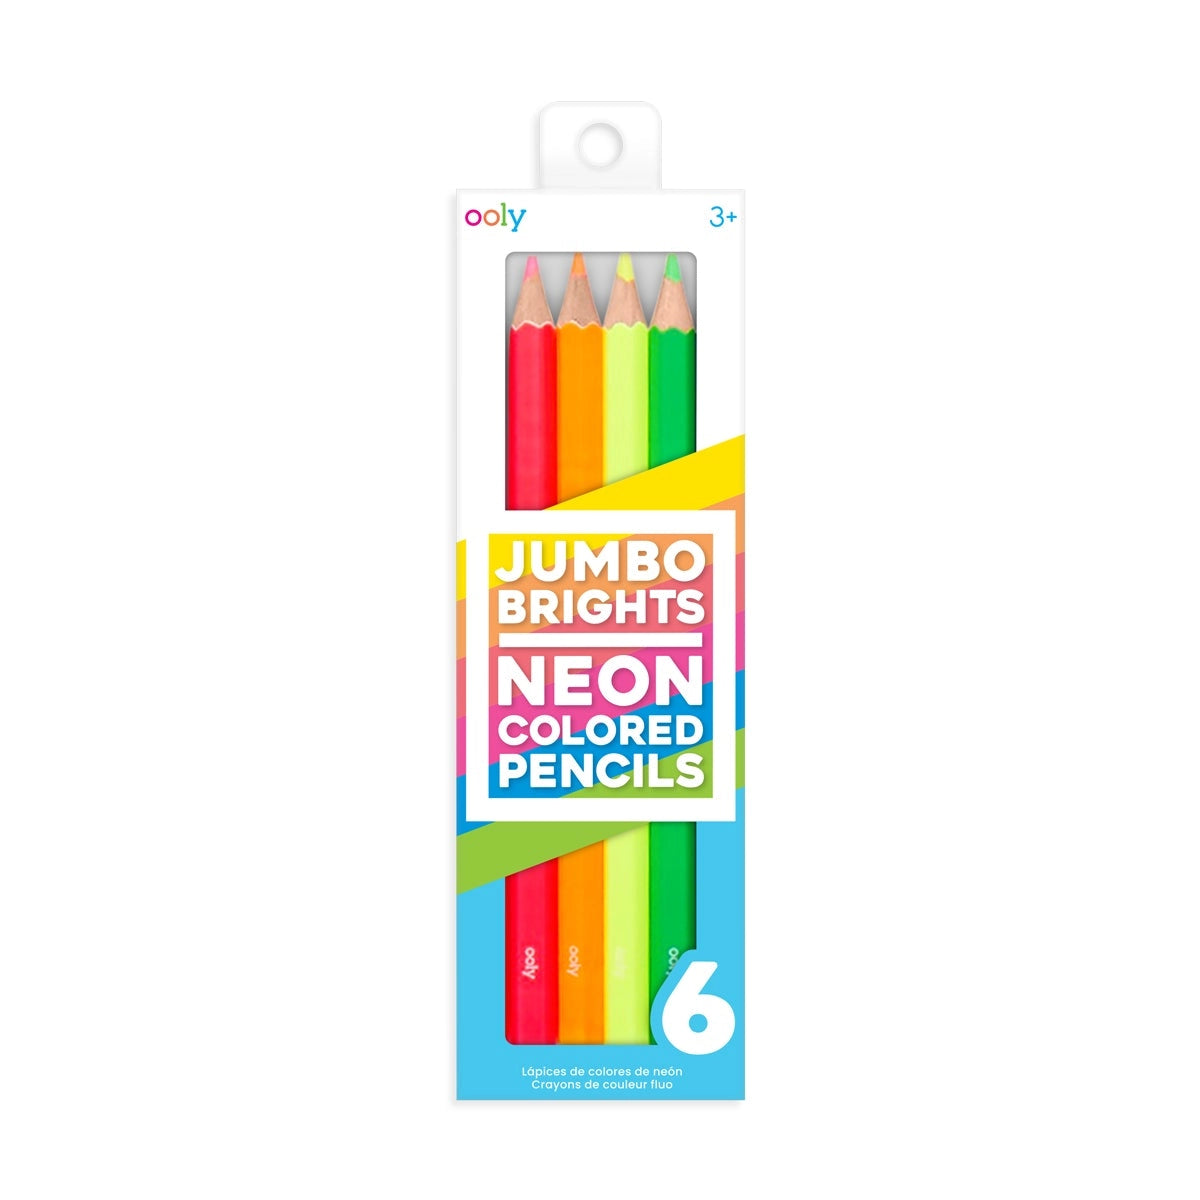 Ooly Jumbo Brights Neon Colored Pencils - Set of 6 | Prelude & Dawn | Los Angeles